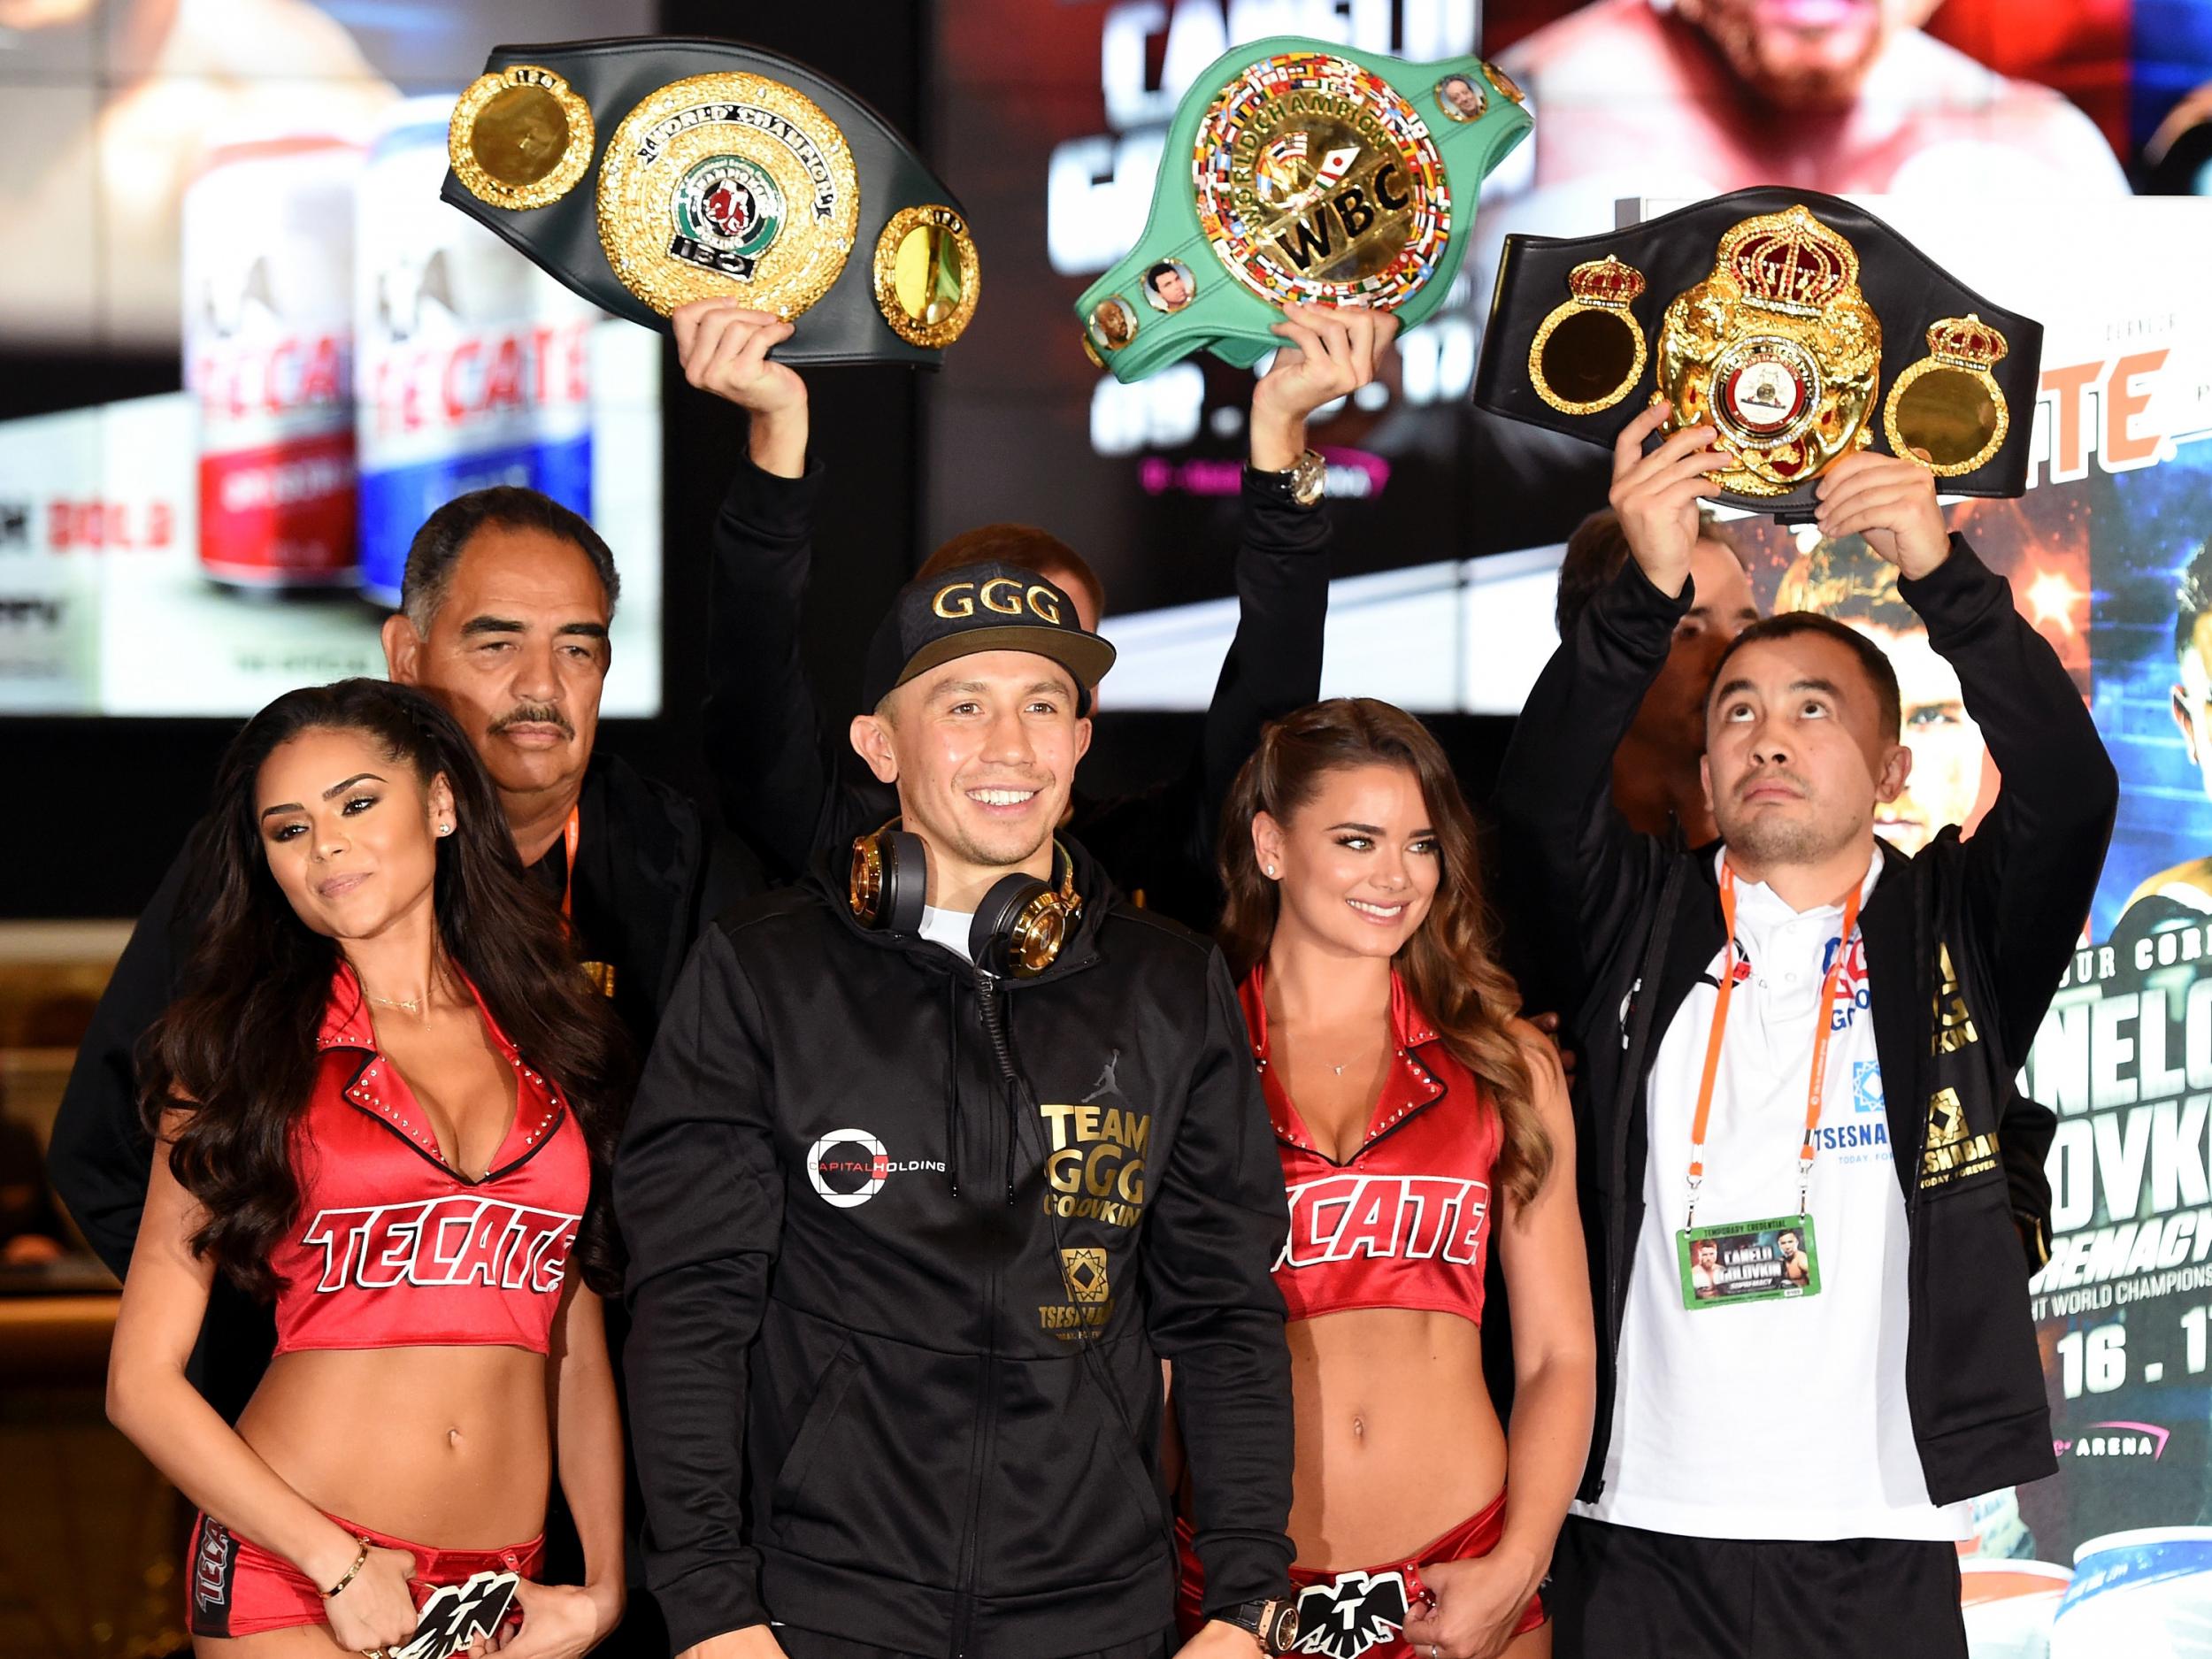 Golovkin comes in as the undefeated champion